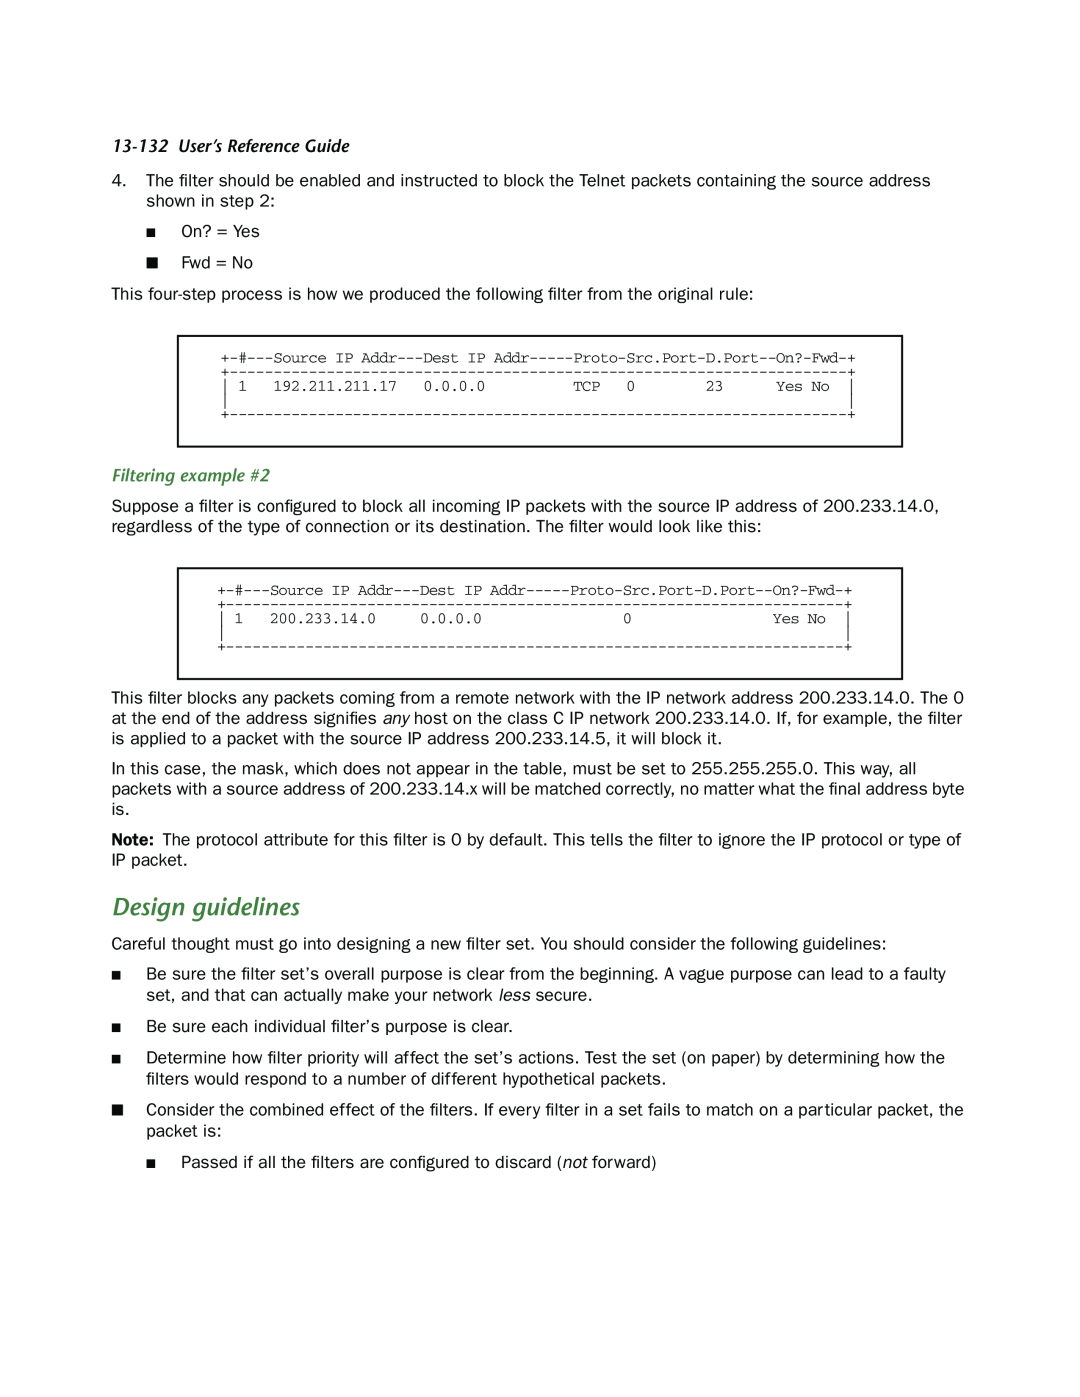 Netopia R910 manual Design guidelines, User’s Reference Guide, Filtering example #2 